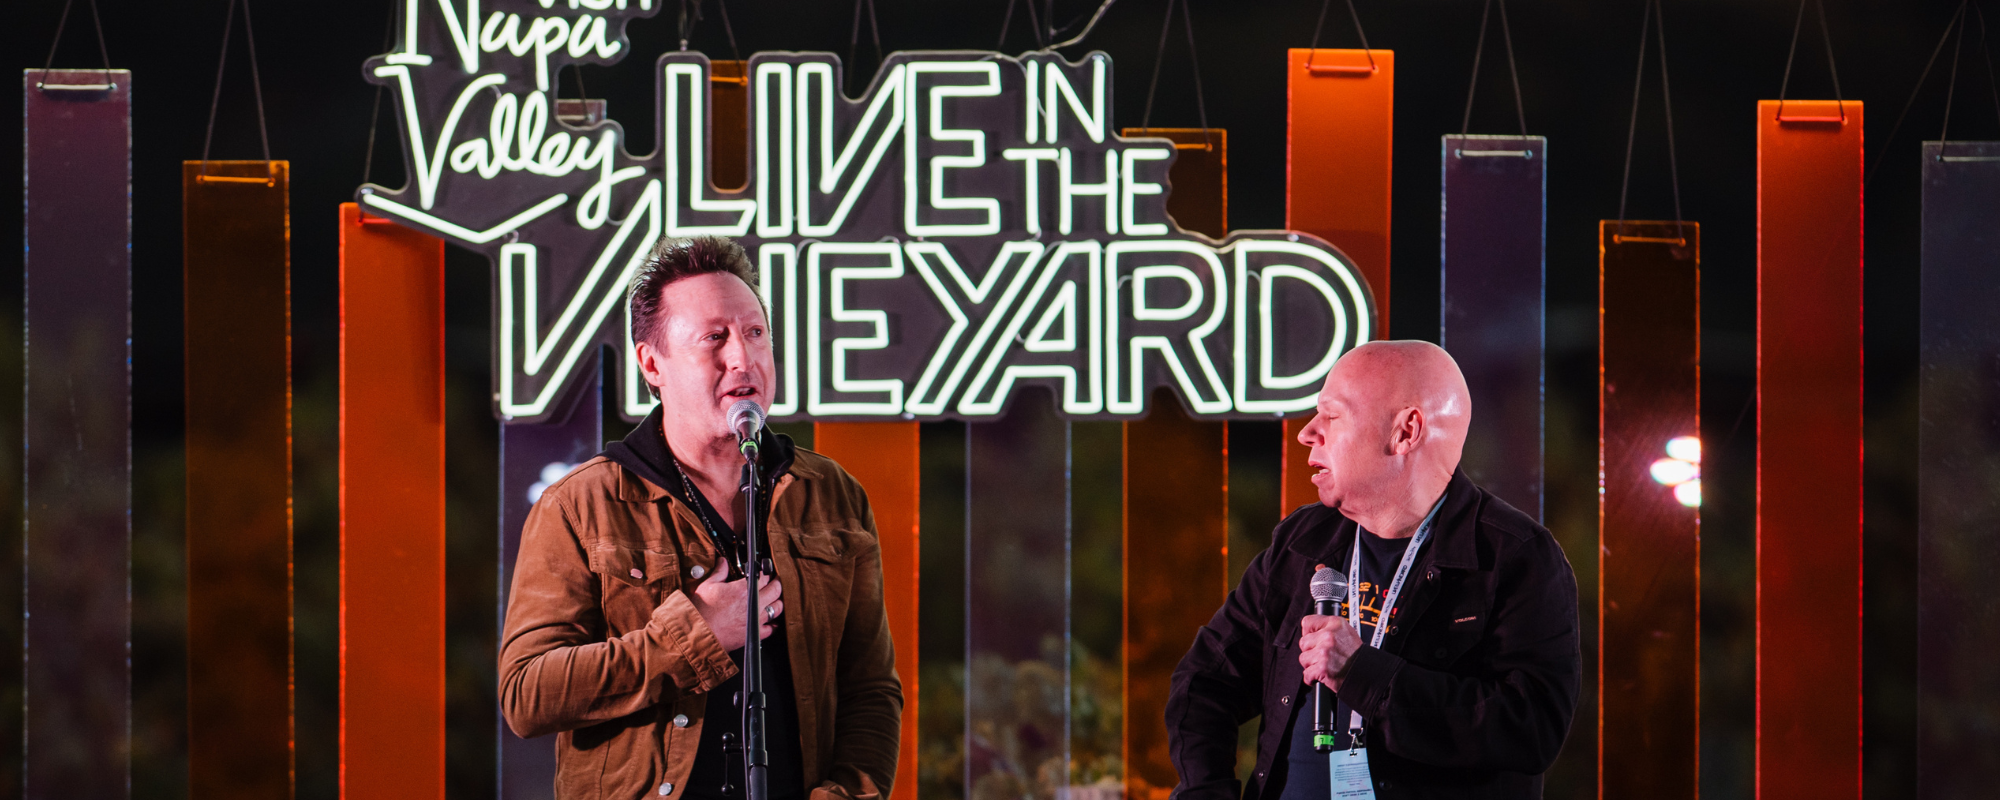 7 Moments We Loved from This Year’s Live in the Vineyard